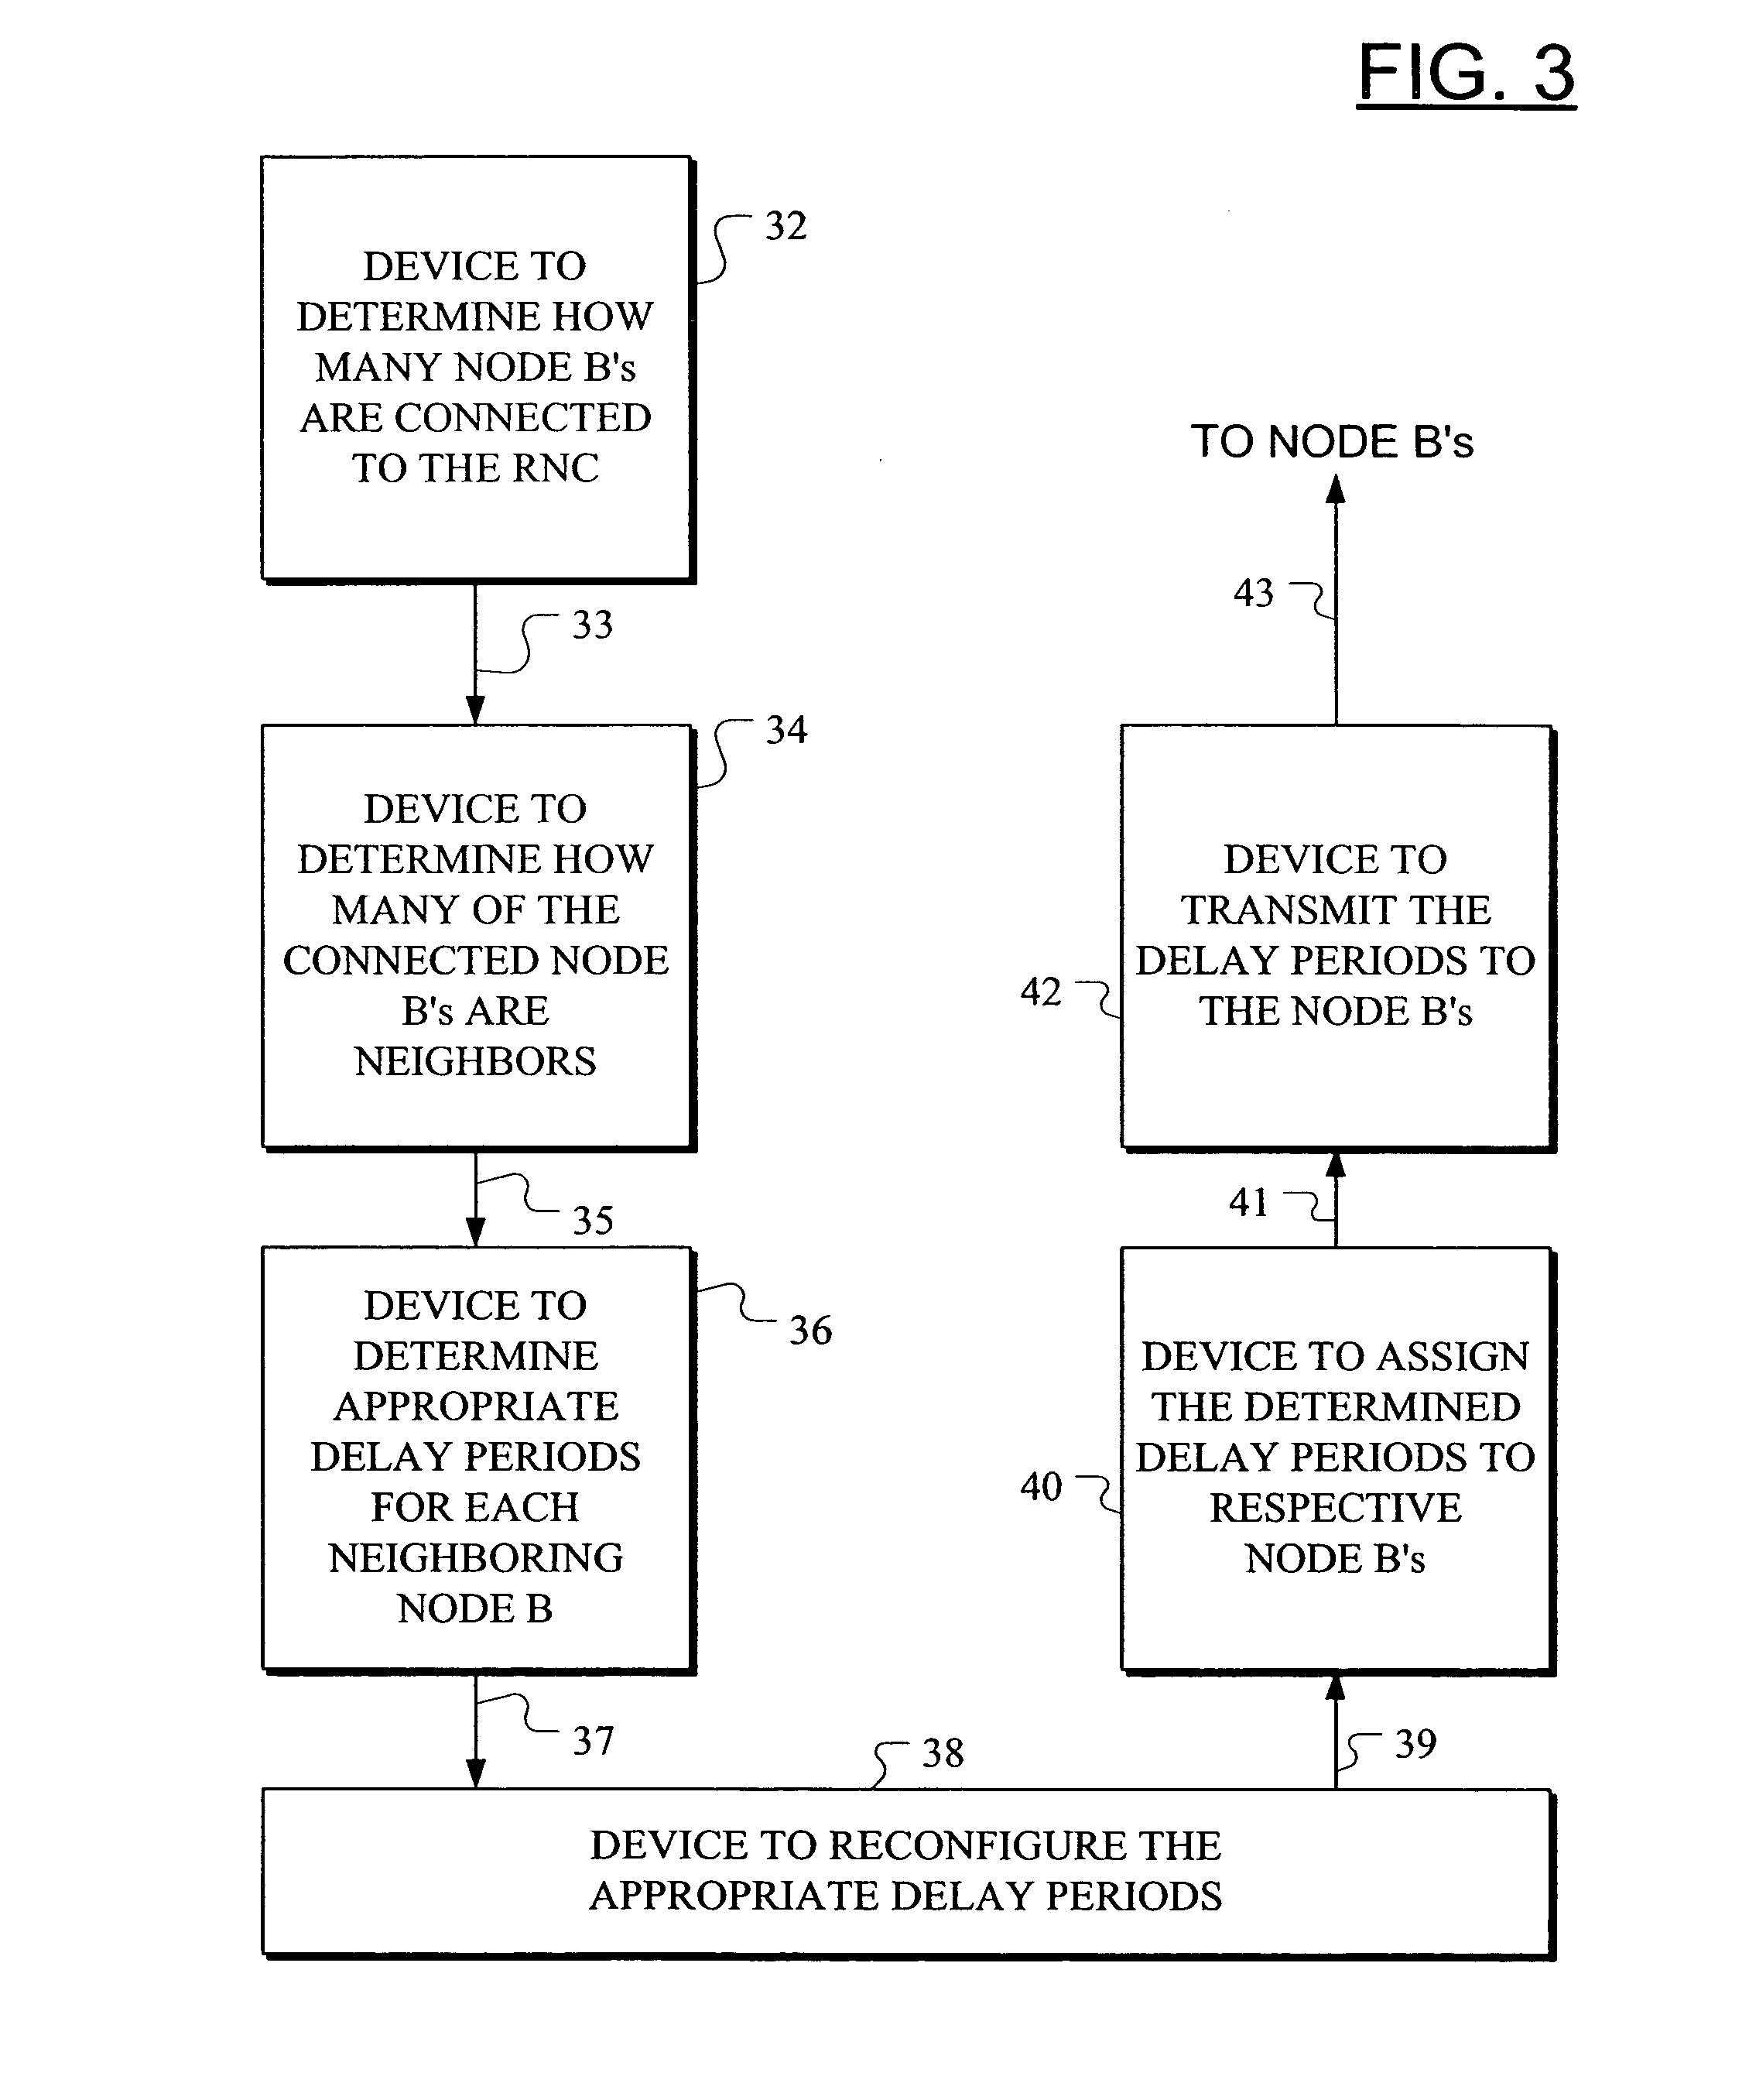 Apparatus and method for arbitrary data rate ramp up after overload on wireless interface